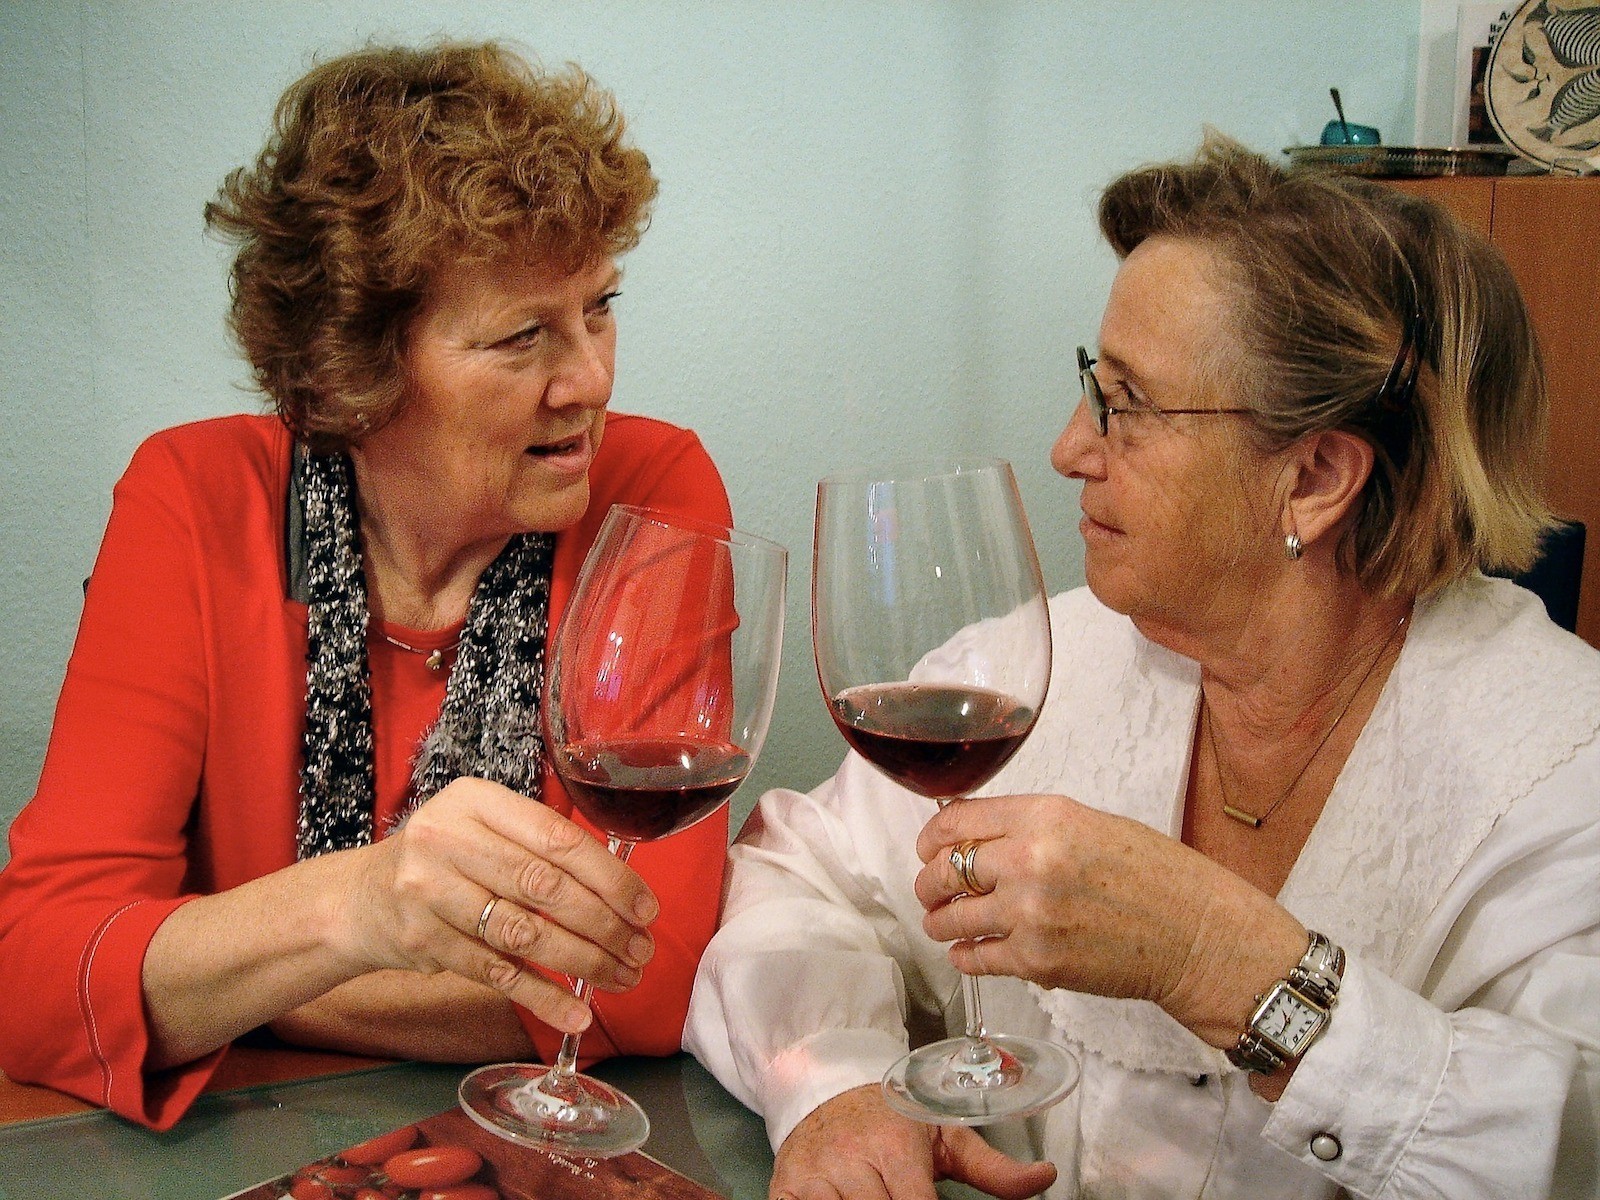 <p>According to the Searidge Foundation, baby boomers have a <a href="https://www.searidgealcoholrehab.com/boozing-boomers-increasing-rates-of-alcohol-use/" rel="noreferrer noopener">drinking problem</a>. They buy a lot of booze: “The generation born between 1946 and 1964 represents 33% of America’s population, while consuming 45% of the nation’s alcohol.”</p> <p>The alcohol addiction rehab centre adds: “Despite the growing knowledge of the hazards of drinking, baby boomers continue to put themselves at risk. As a generation, their liberal views of alcohol use puts them in danger of developing alcohol addiction.”</p>